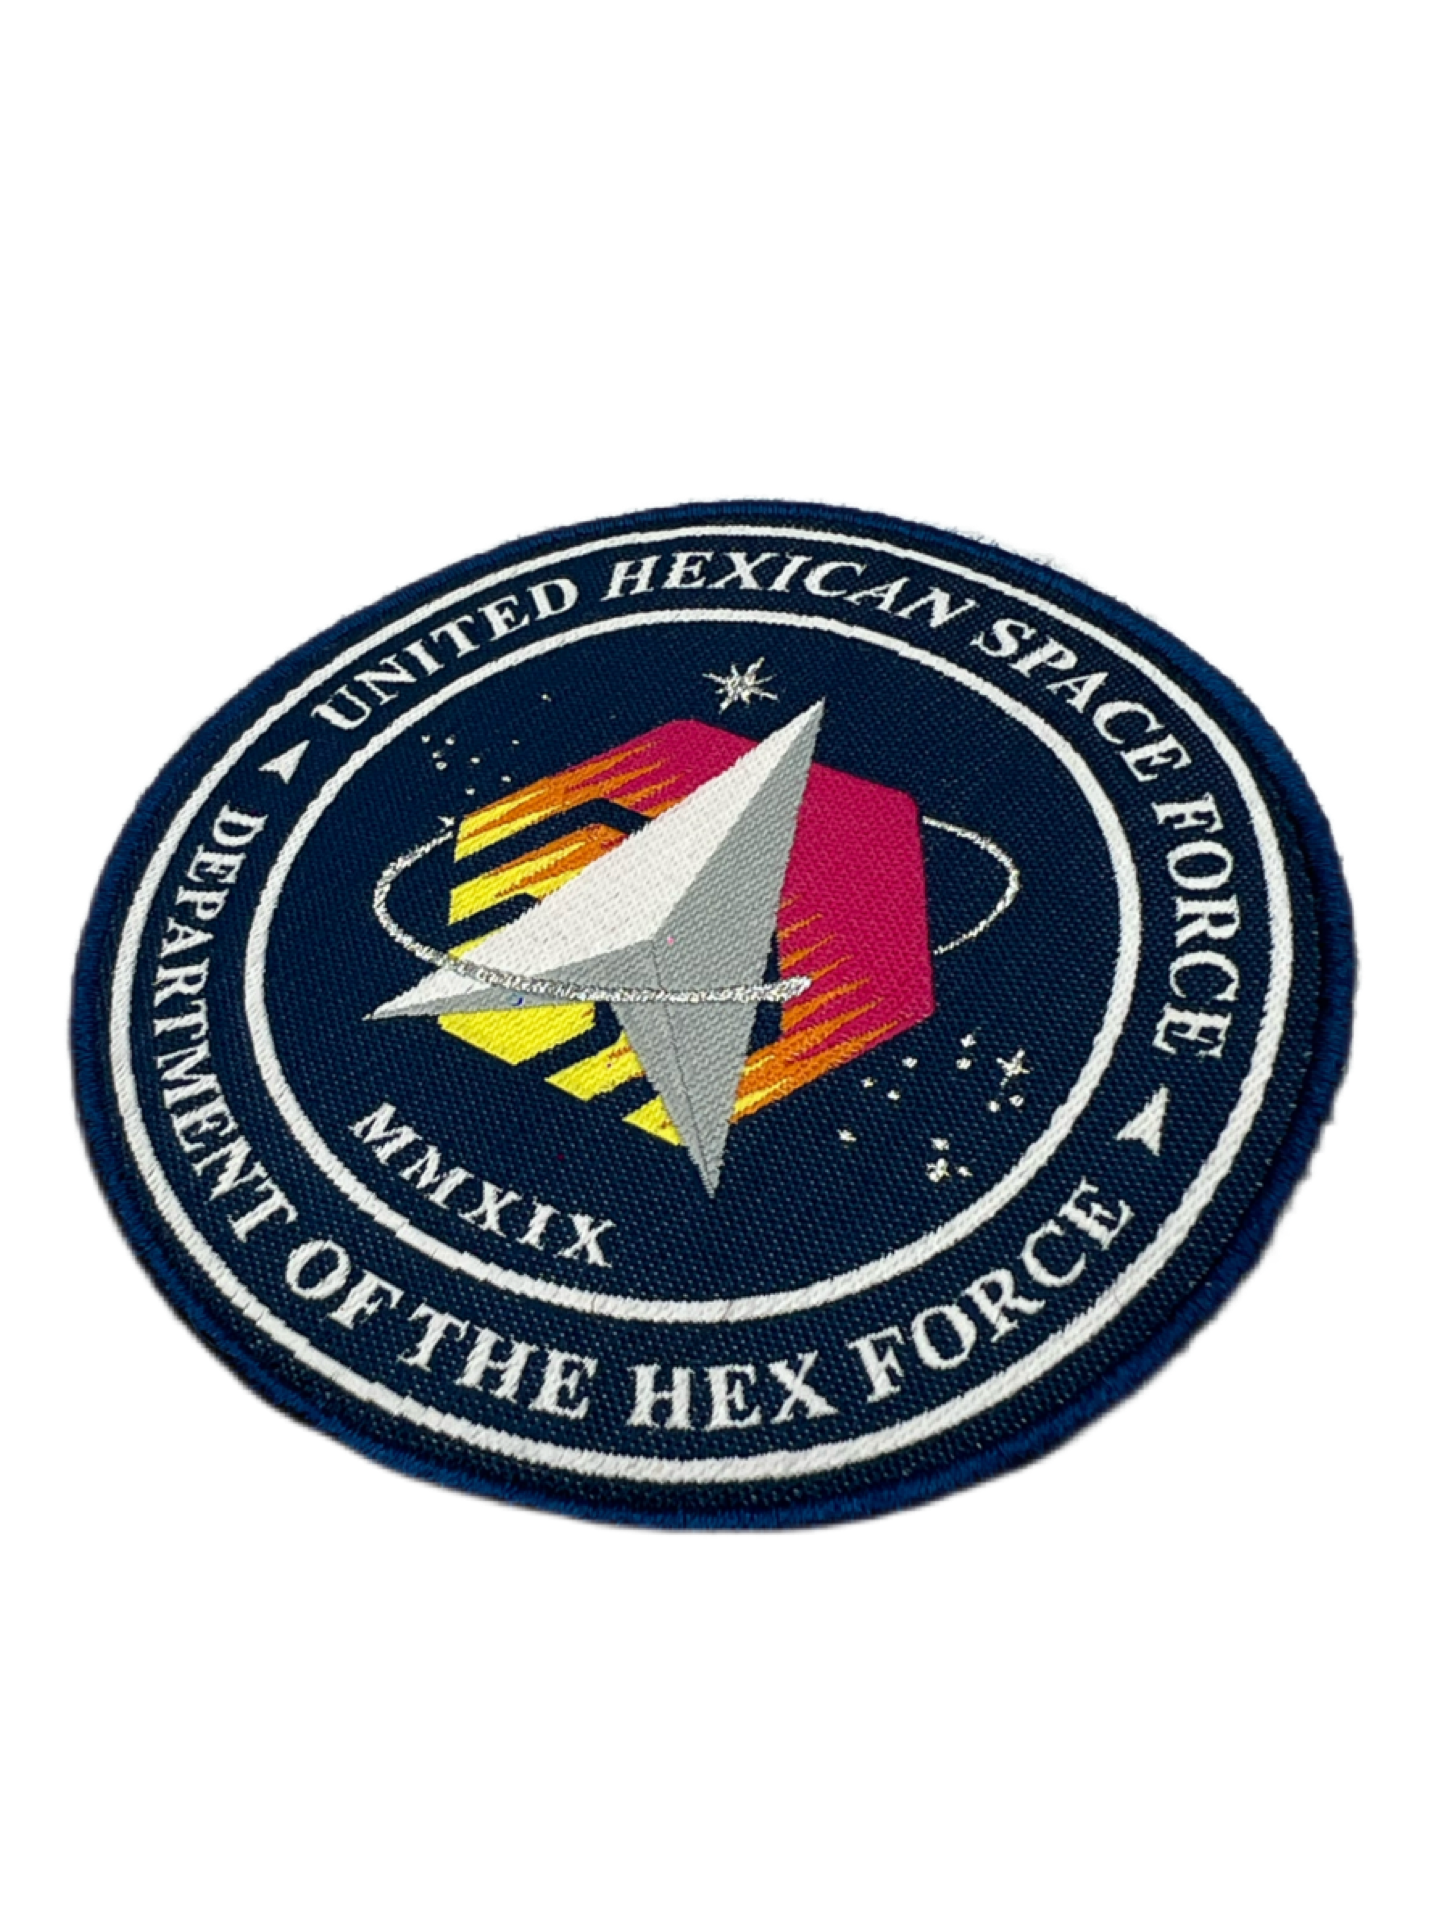 Hexican Space Force Patch